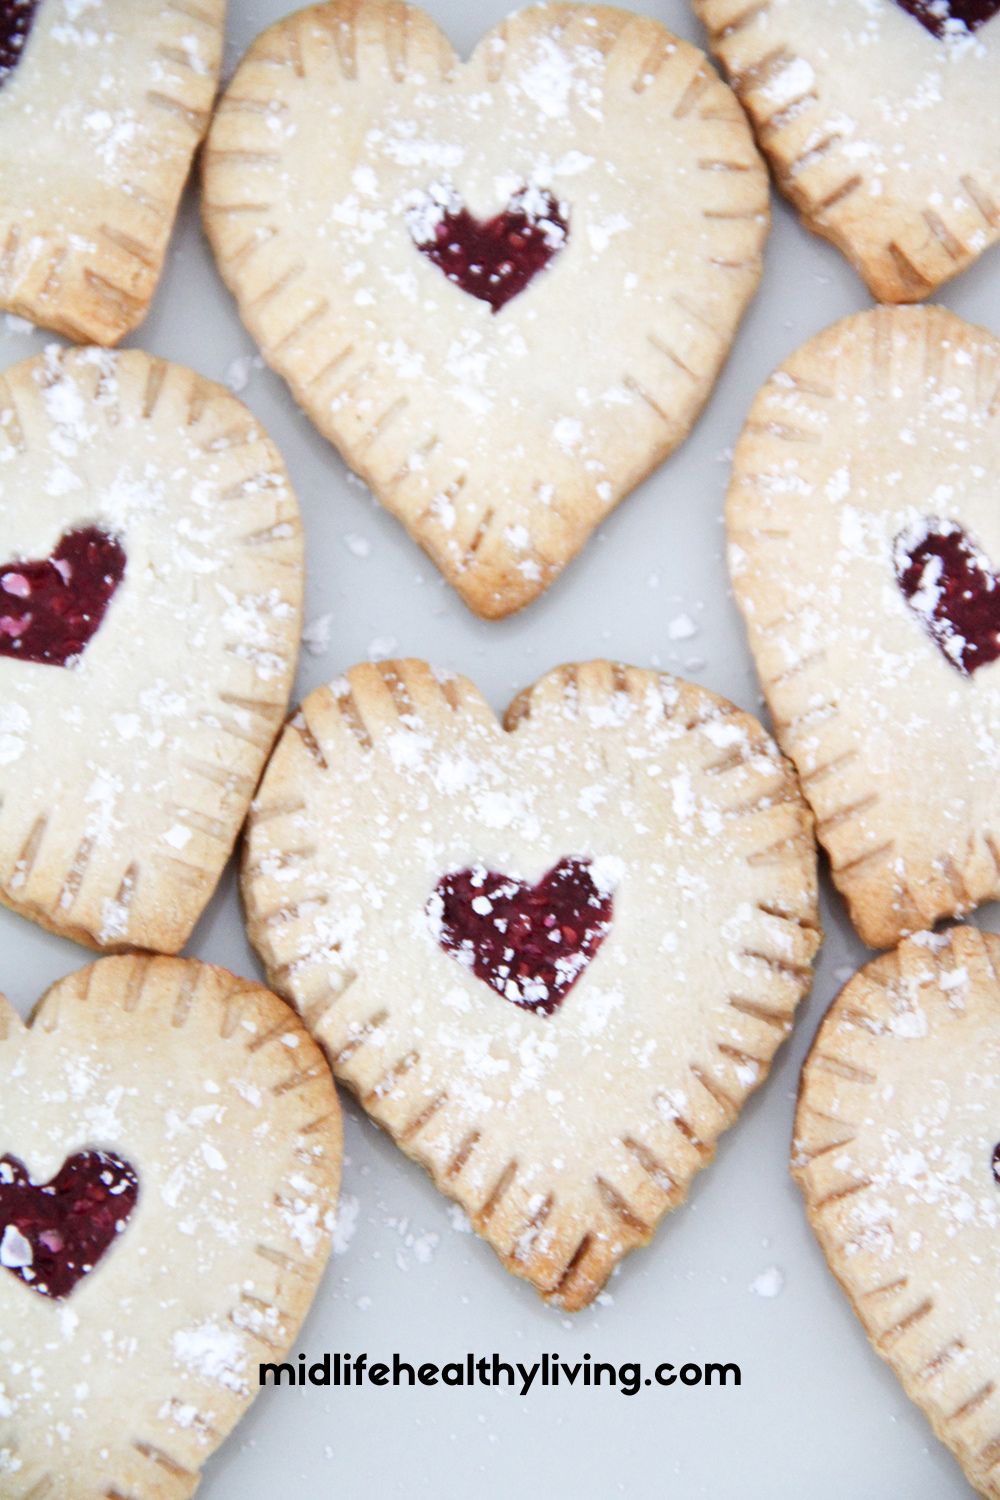 a close up of the heart shaped raspberry hand pies